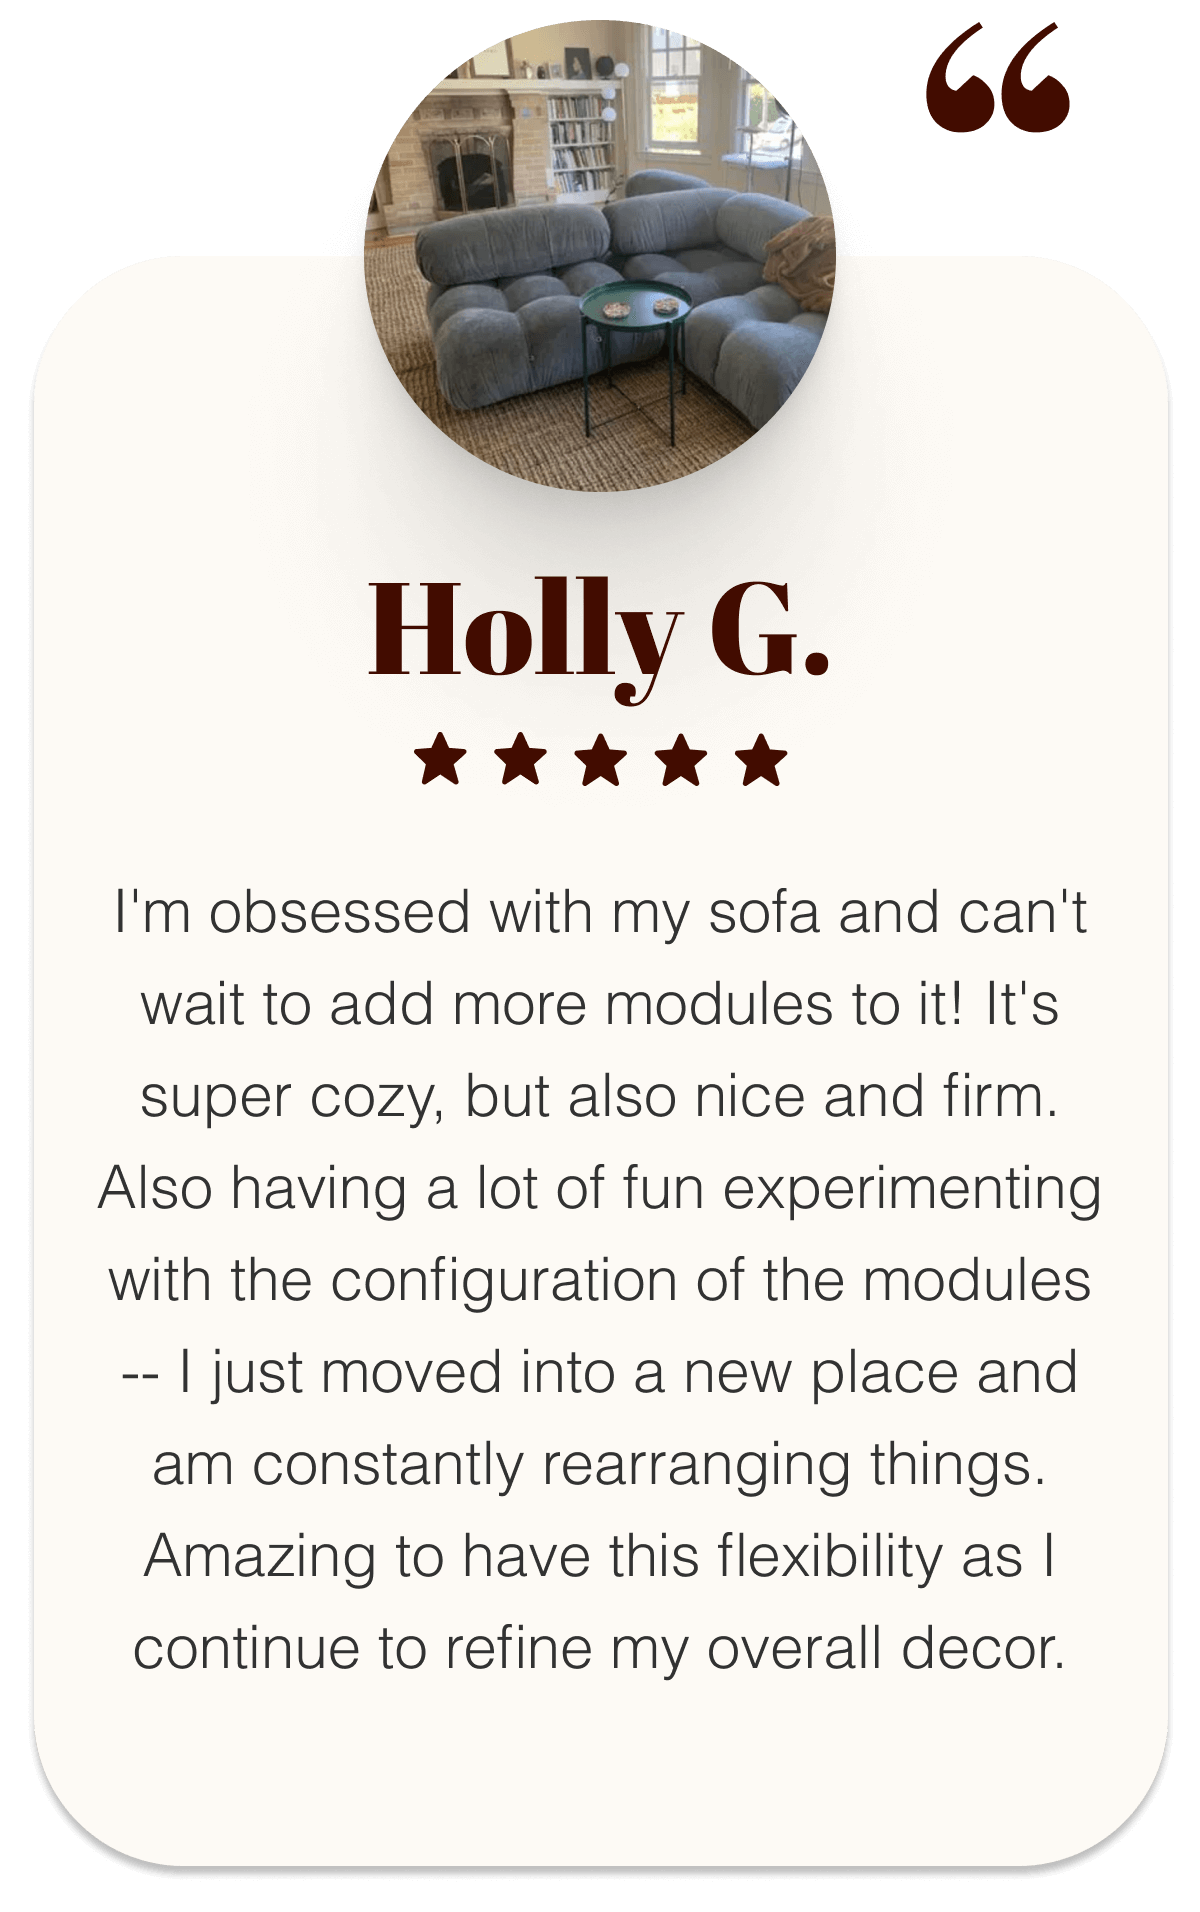 Holly G. ⭐⭐⭐⭐⭐ “I'm obsessed with my sofa and can't wait to add more modules to it! It's super cozy, but also nice and firm. Also having a lot of fun experimenting with the configuration of the modules -- I just moved into a new place and am constantly rearranging things. Amazing to have this flexibility as I continue to refine my overall decor.”